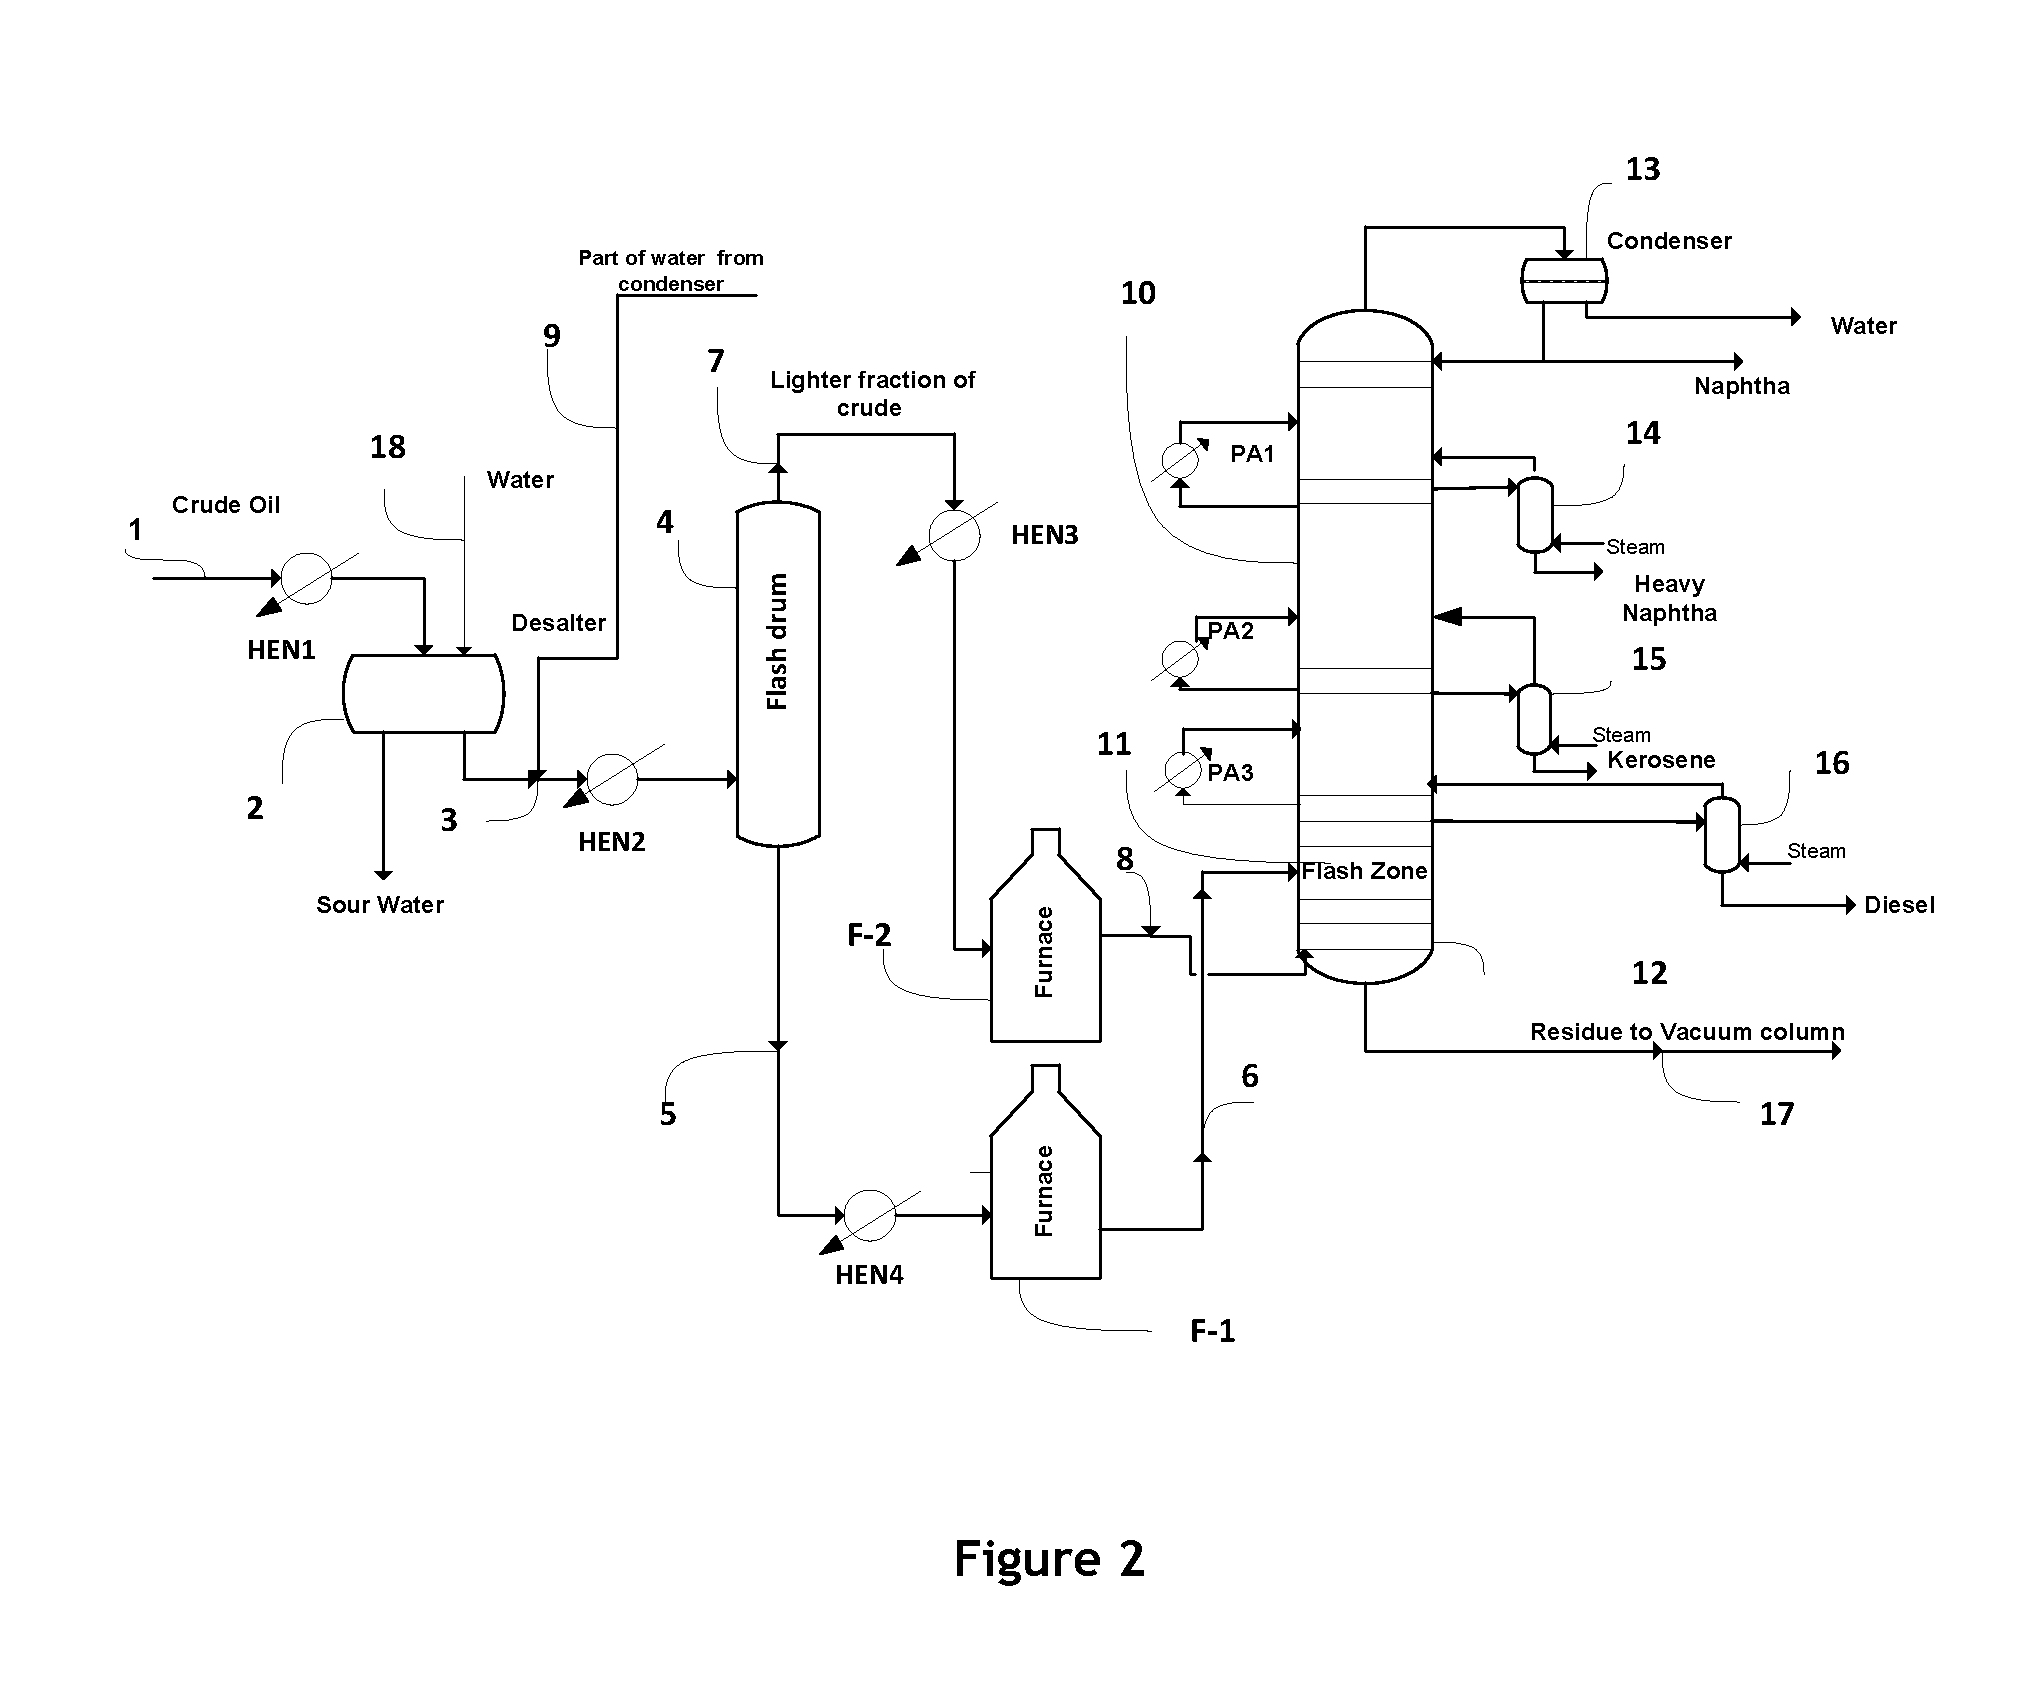 Method for increasing gas oil yield and energy efficiency in crude oil distillation